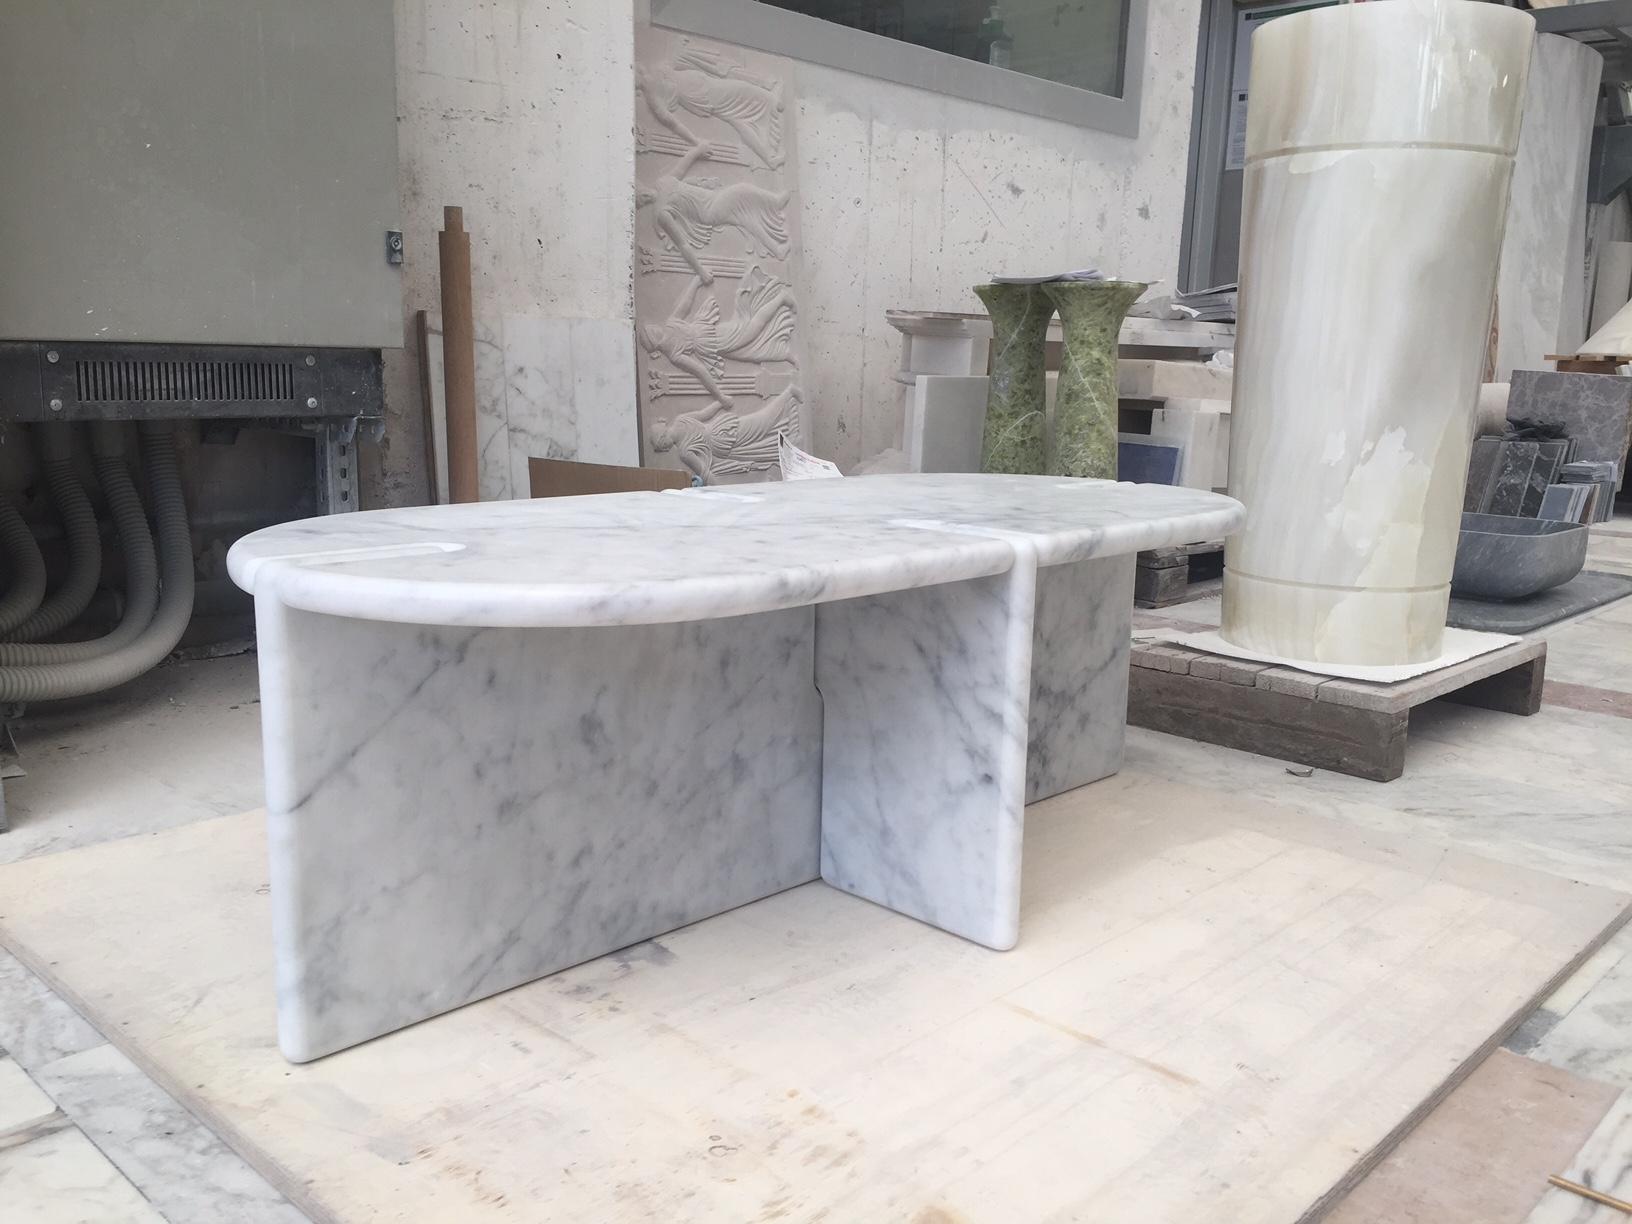 Matremonio table in Bianco Carrara stone. Perfect for any home. Please inquire for information about other marble material choices.